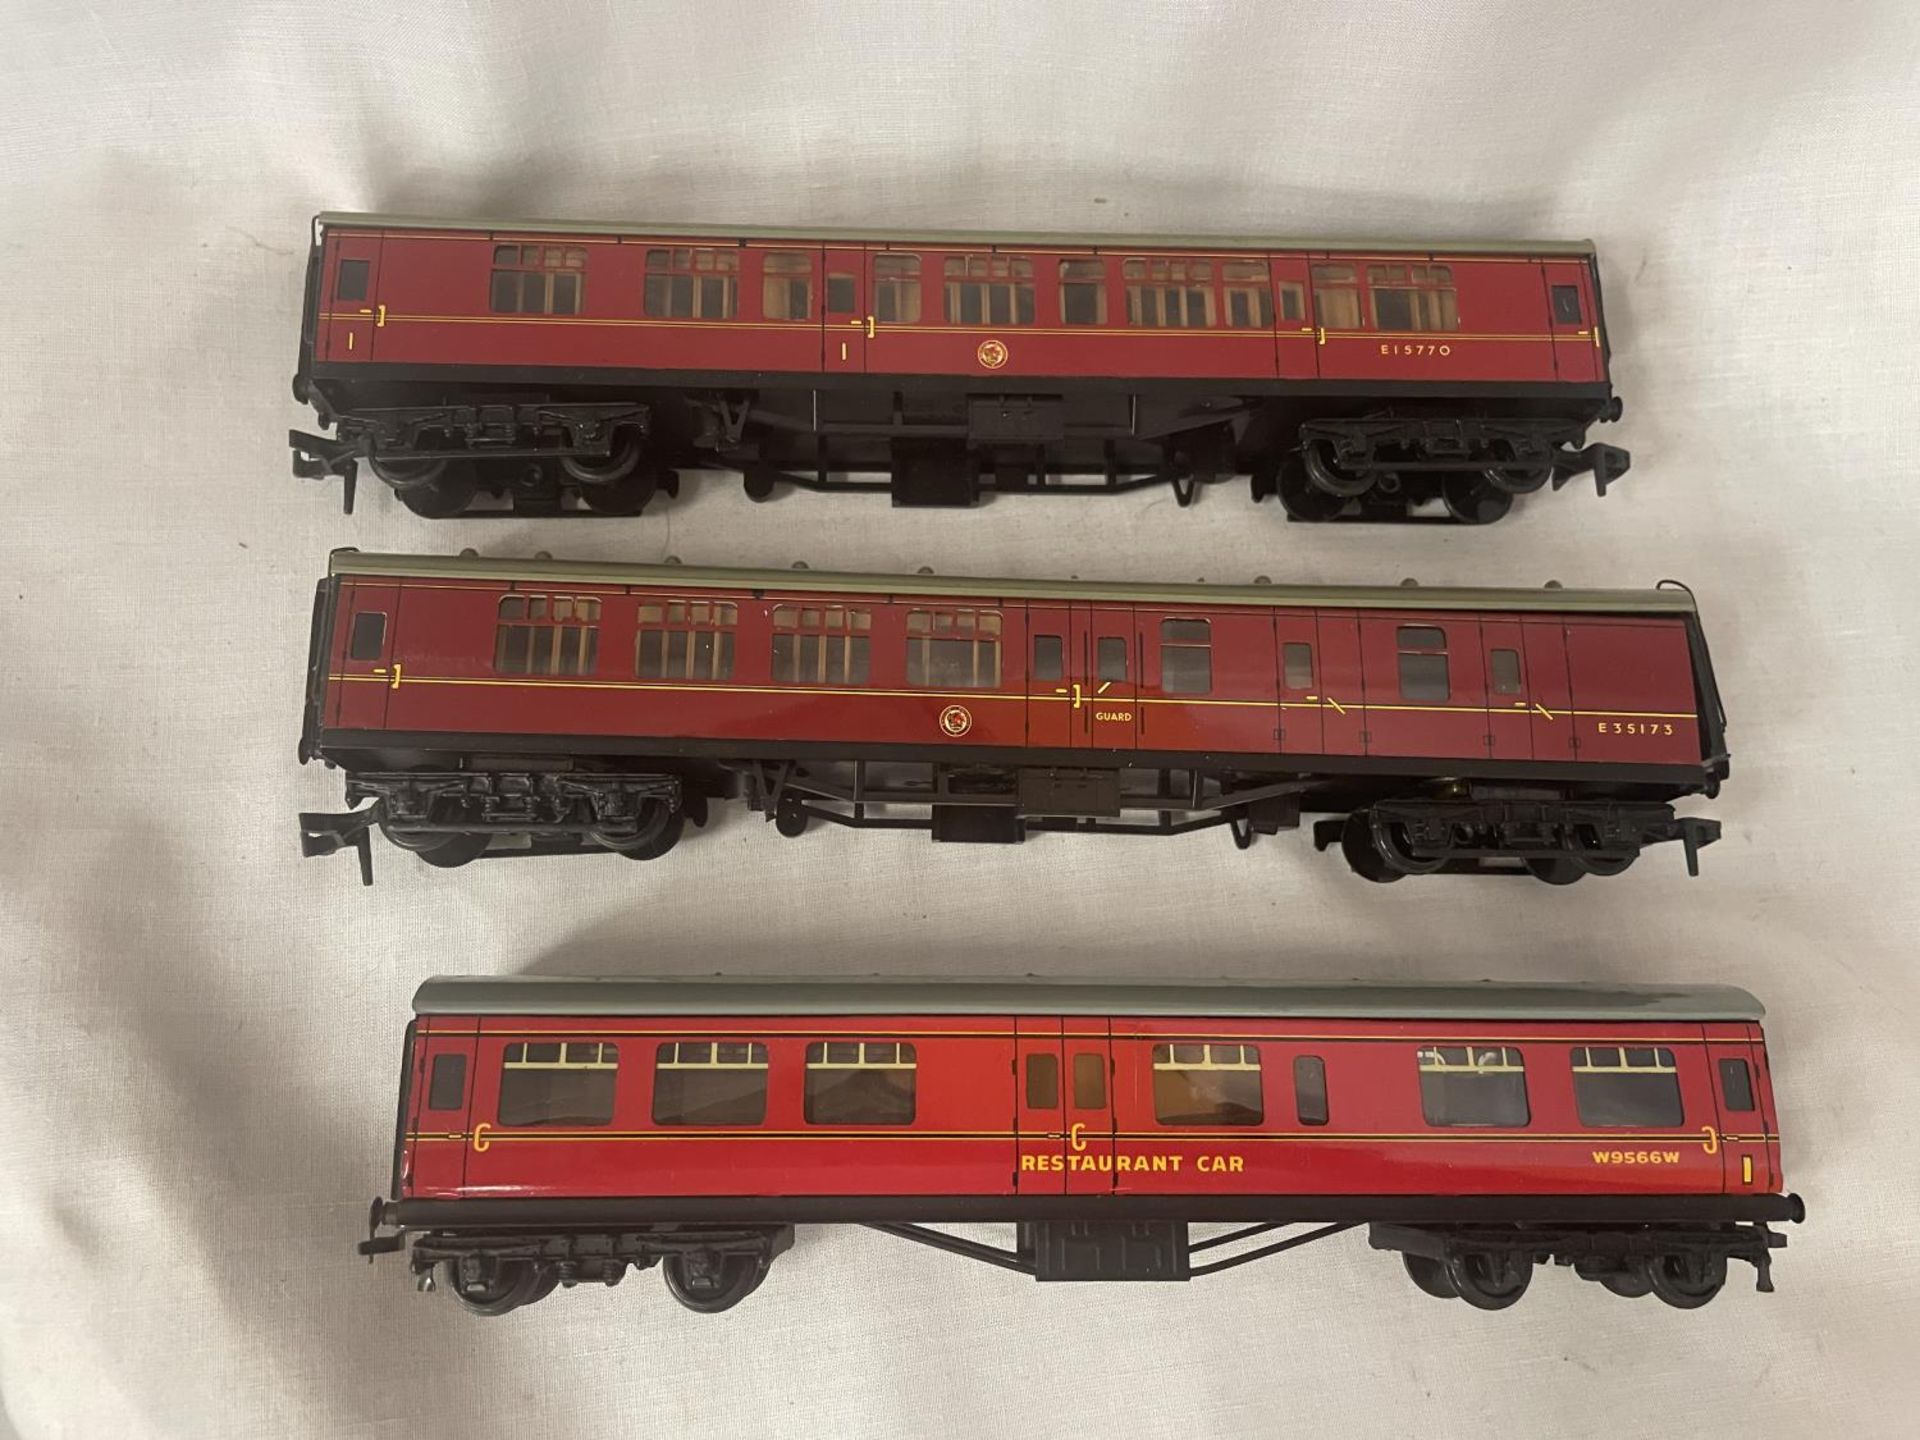 VARIOUS HORNBY DUBLO ITEMS - A 2-6-2 LOCOMOTIVE "DORCHESTER" AND TENDER, A NUMBER 133 CRANE, - Image 6 of 9